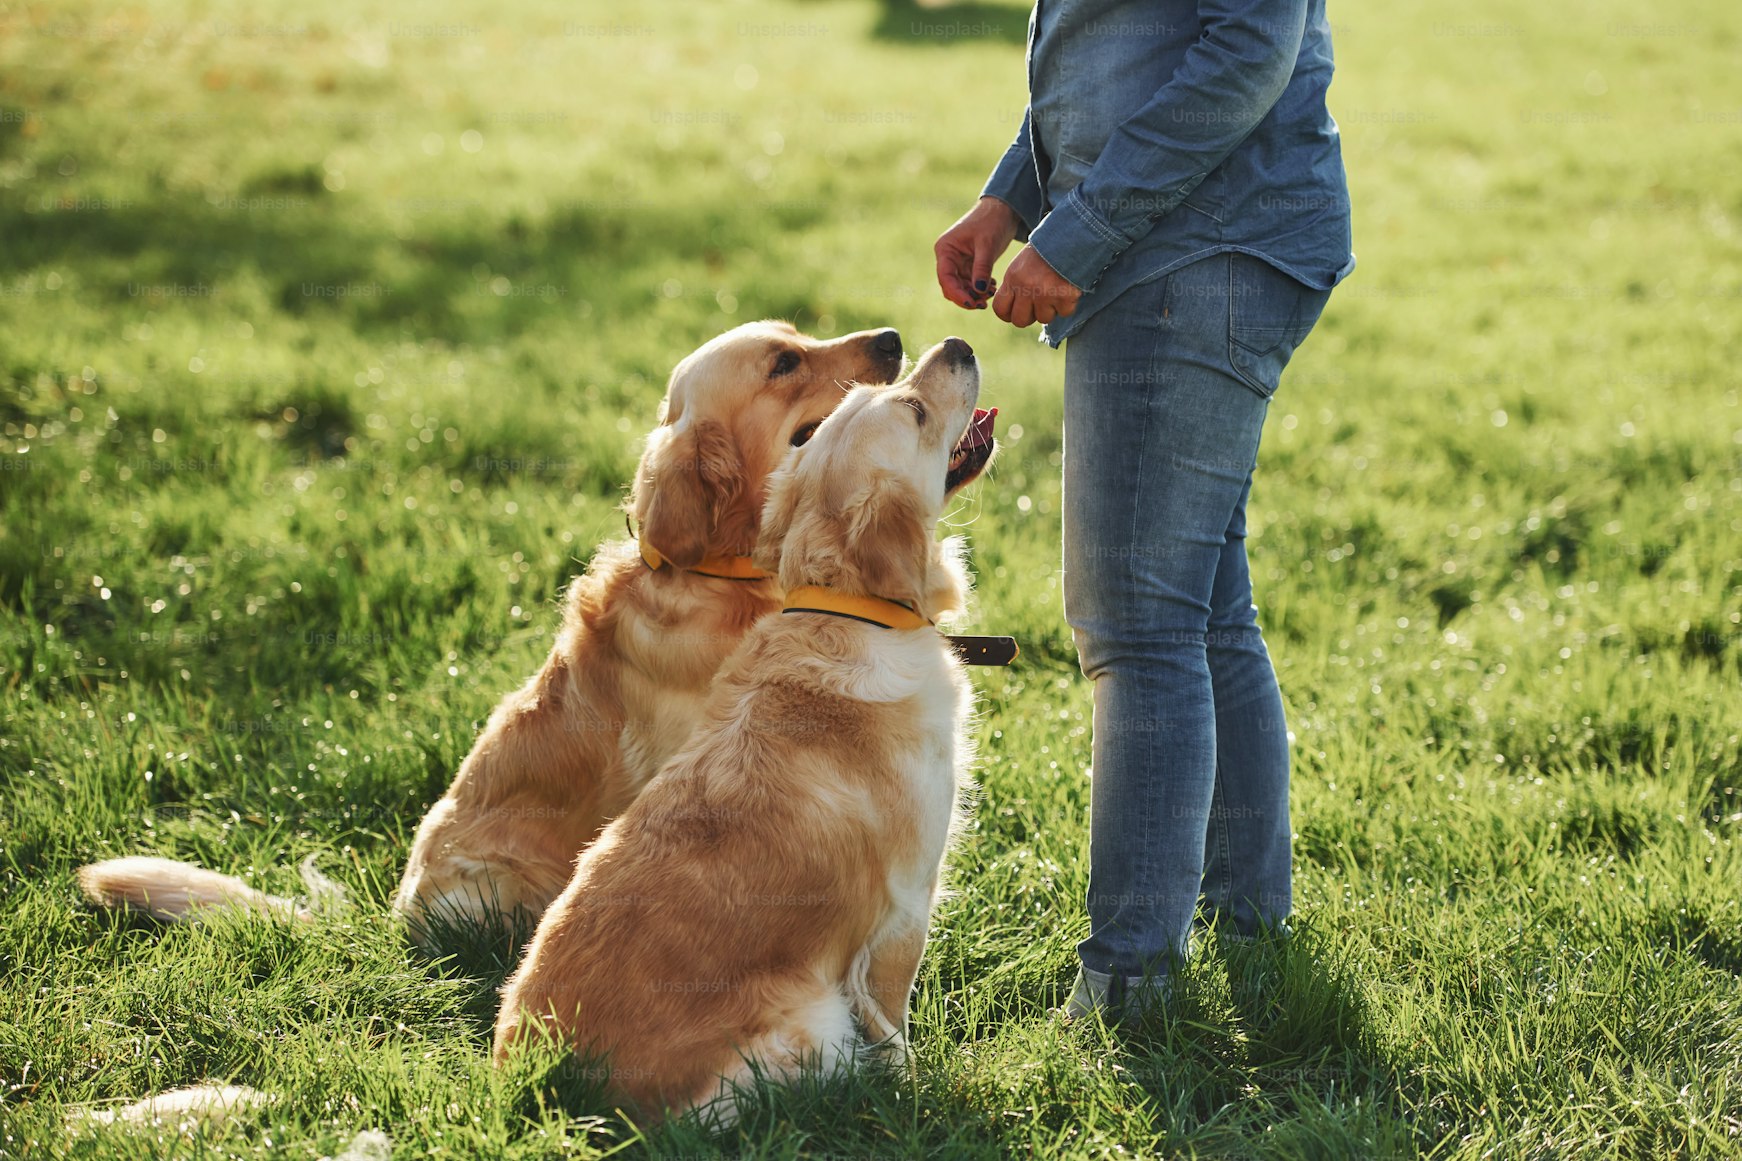 Preparing Your Home for a Rehomed Golden Retriever